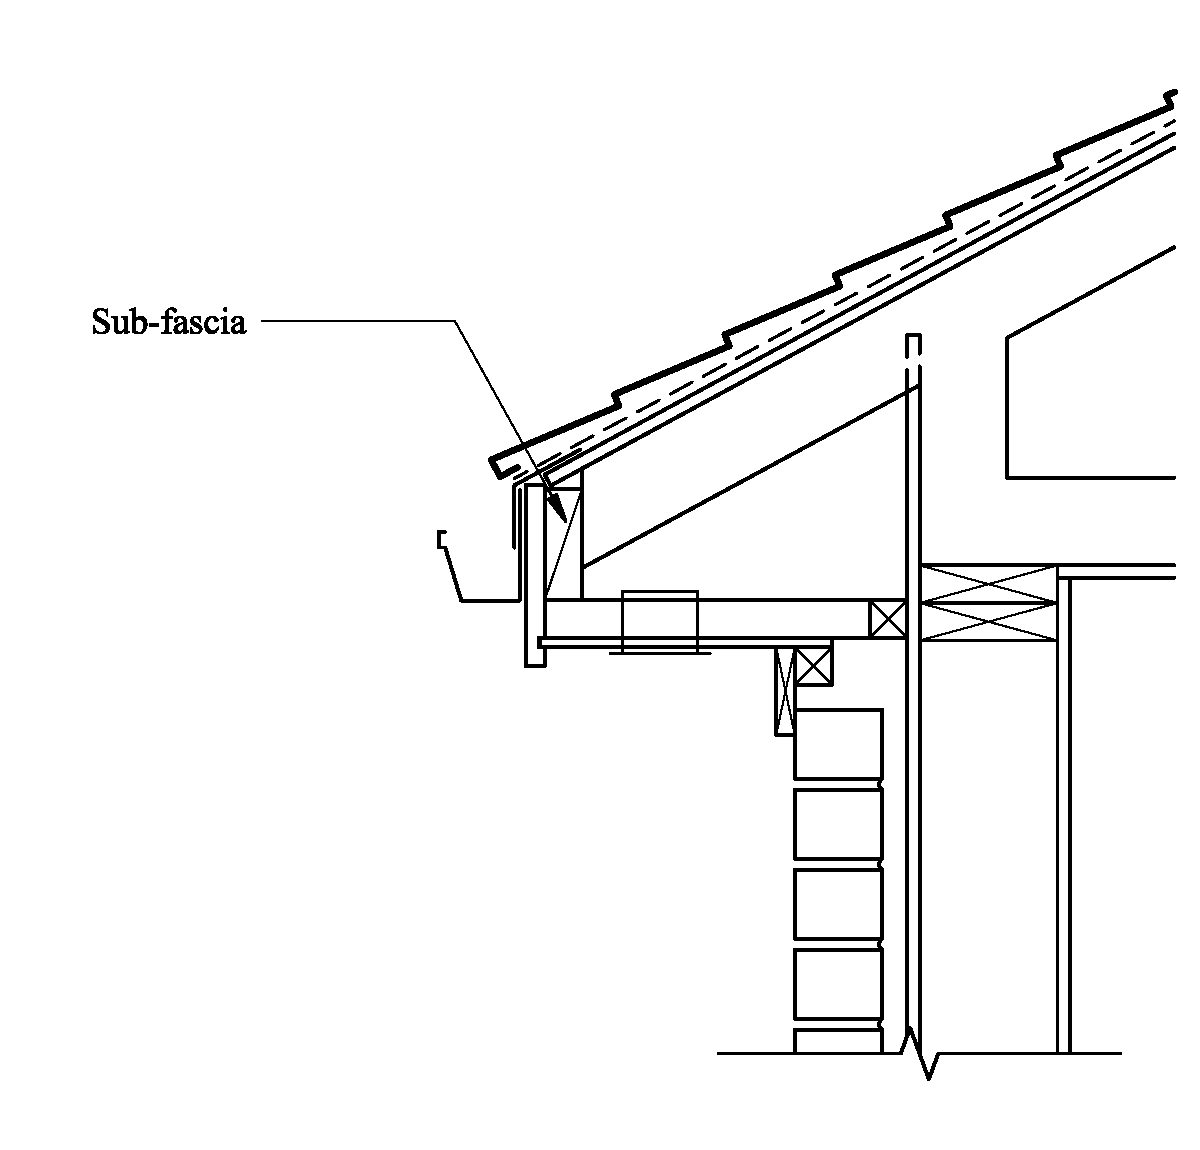 House Design Manual: Constructing Eaves - Sequencing